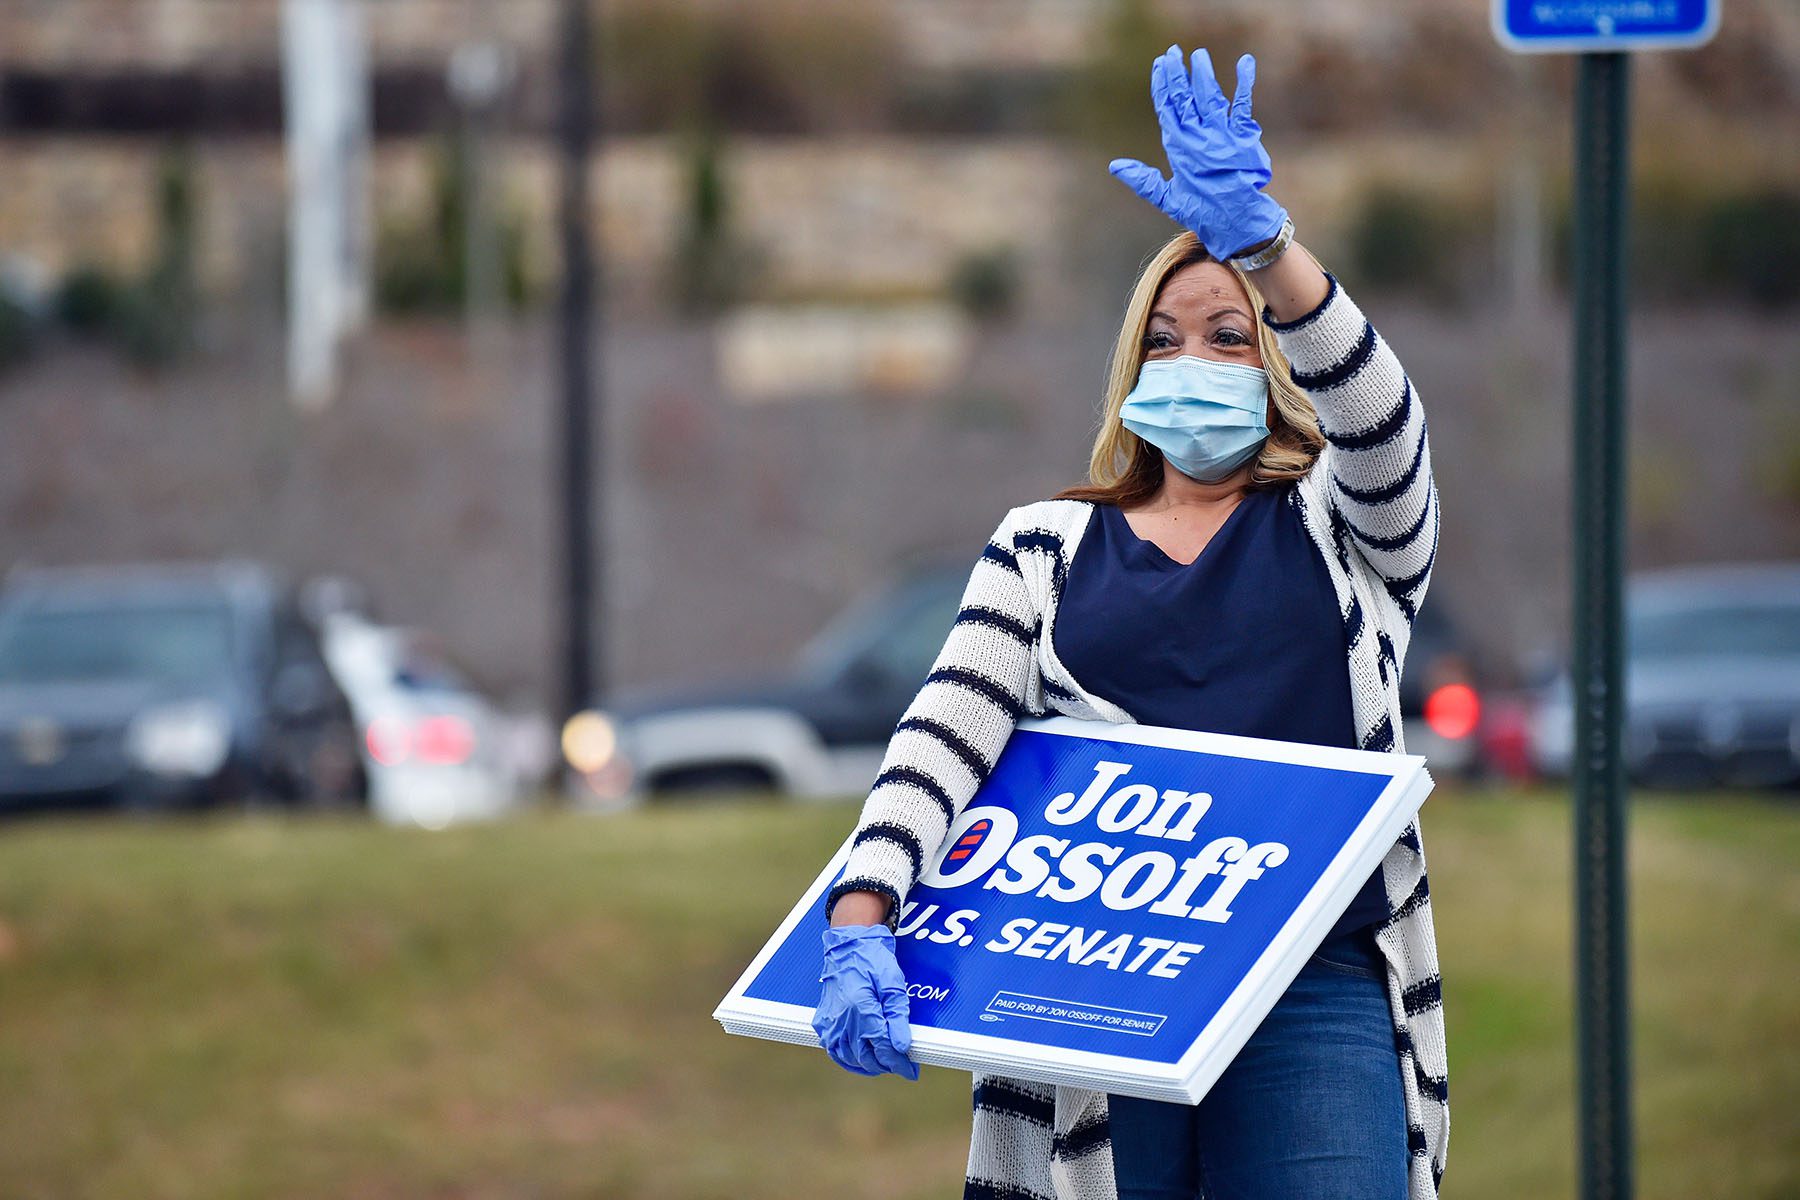 Lucy McBath waves at supporters of Jon Ossof. She is carrying yard signs that read "Jon Ossof U.S. Senate" and wearing a face mask and plastic gloves.